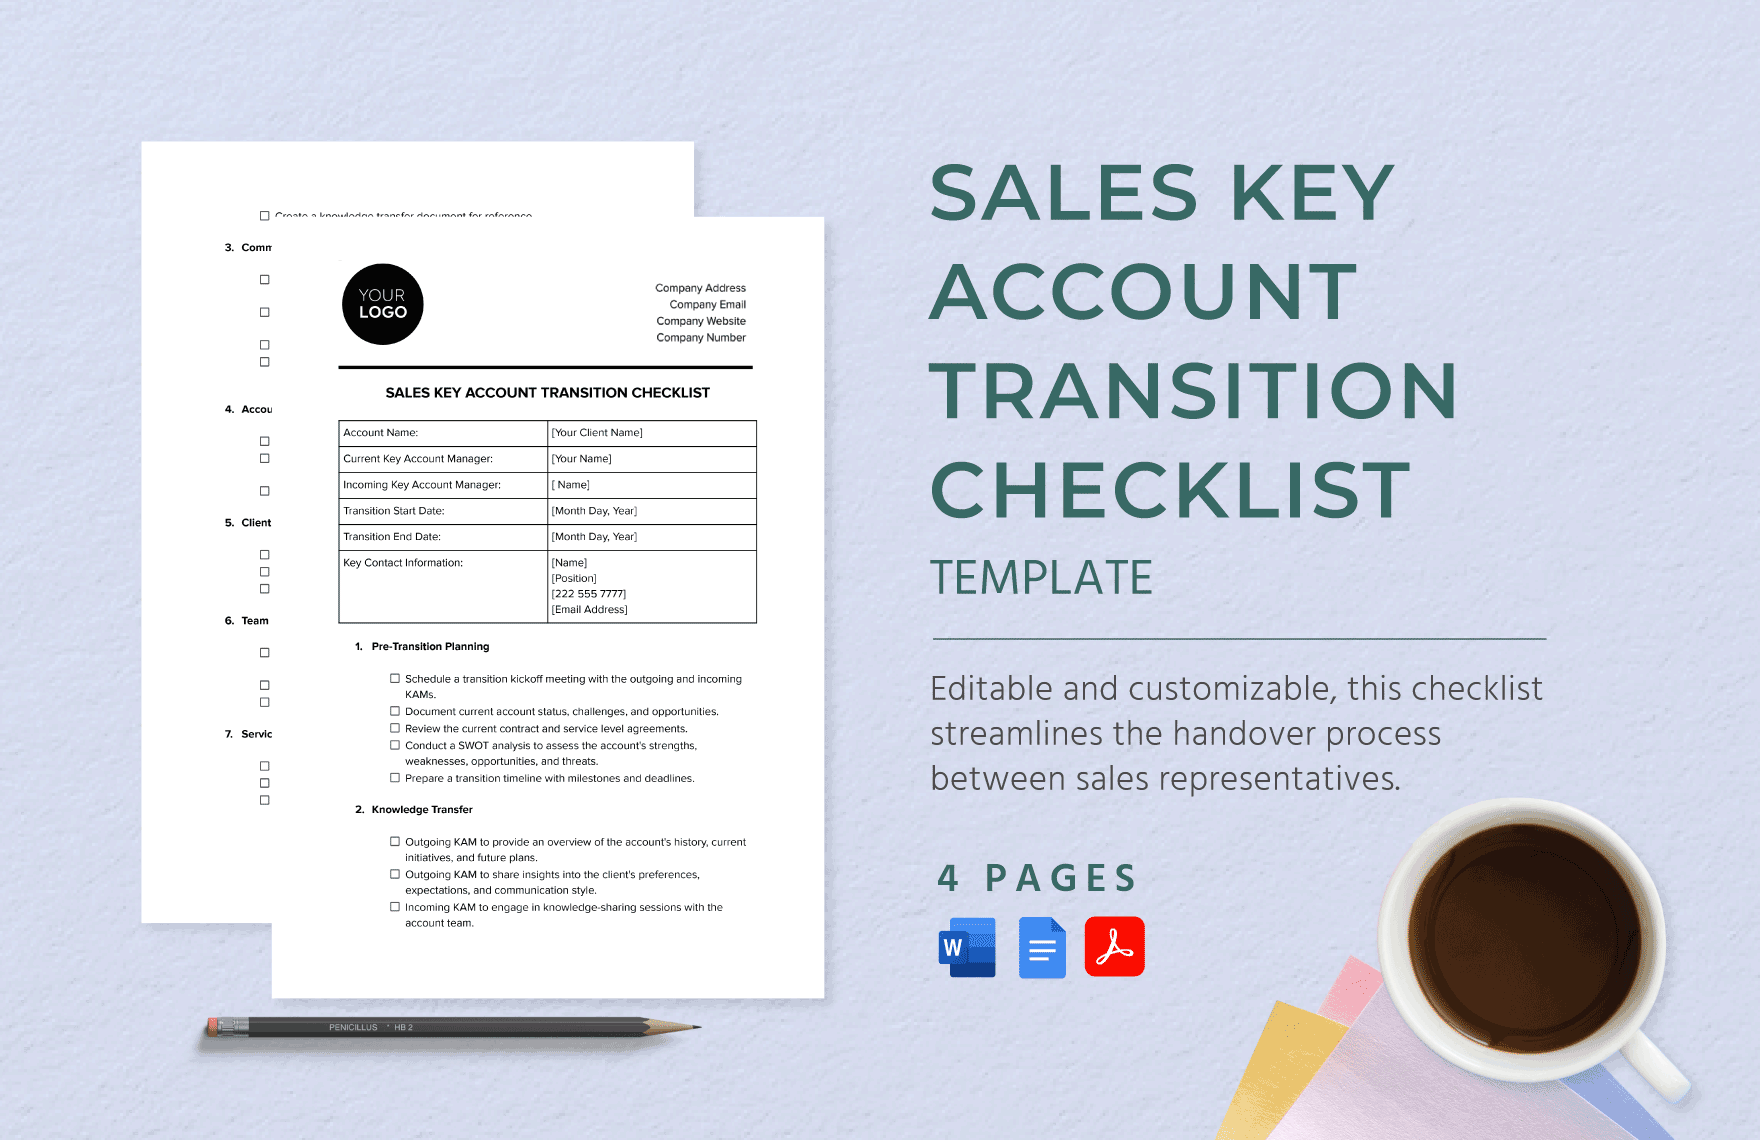 Sales Key Account Transition Checklist Template in Word, Google Docs, PDF